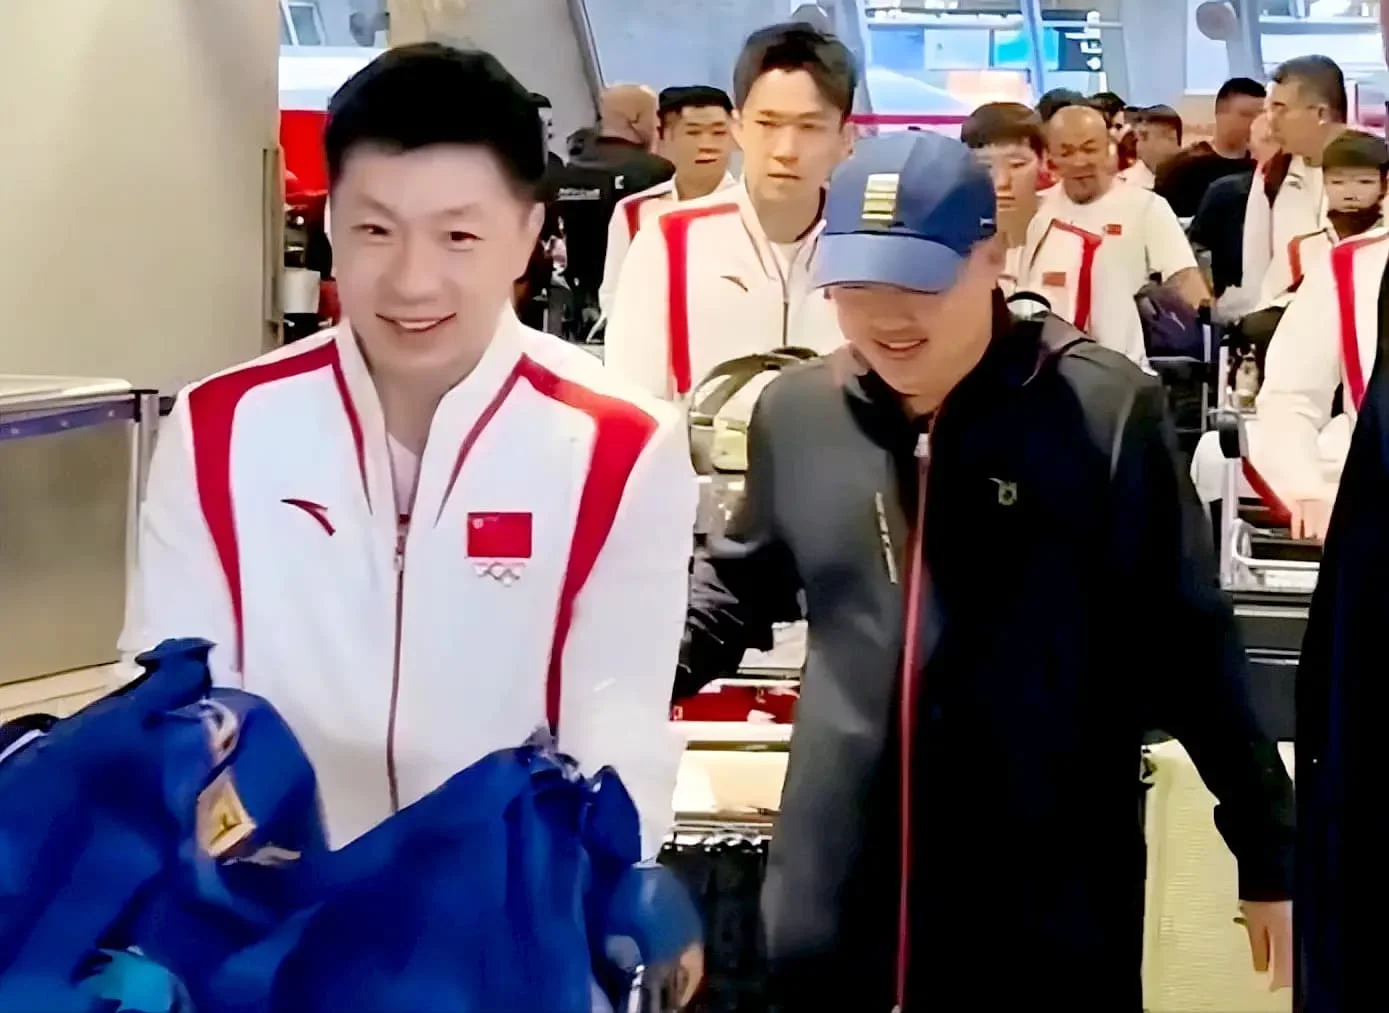 Chinese table tennis team